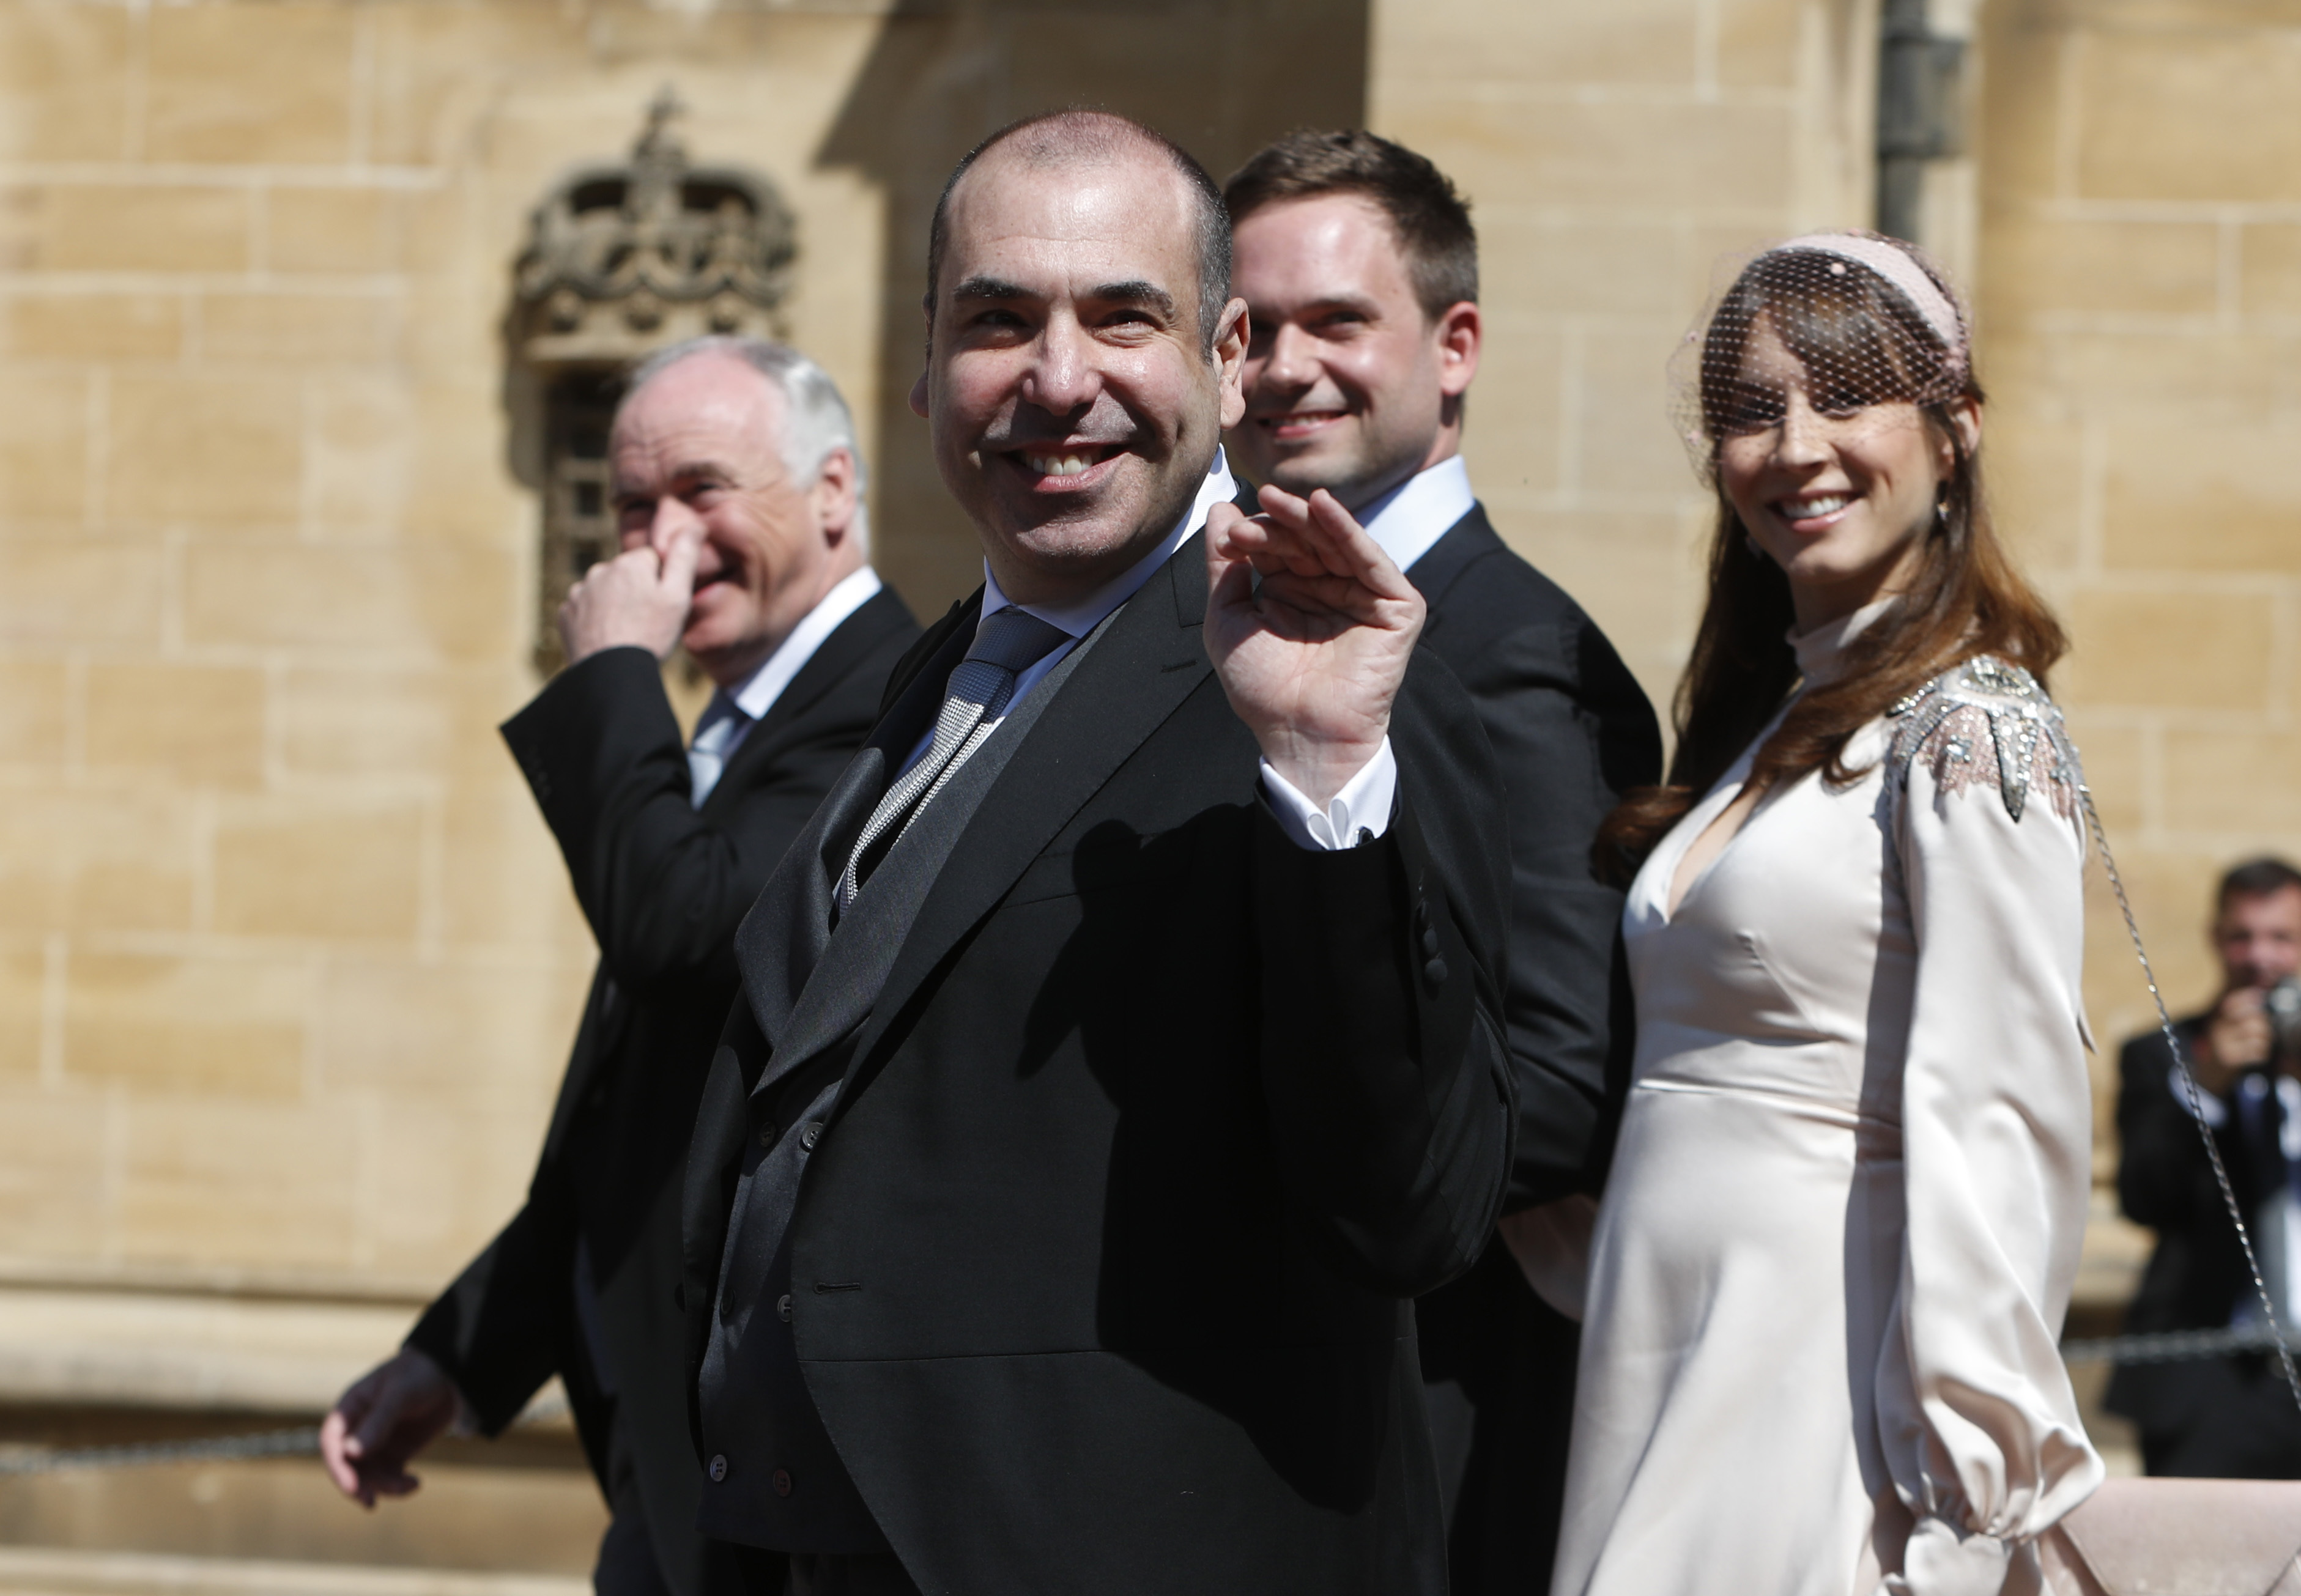 Rick Hoffman at St George's Chapel at Windsor Castle for Prince Harry and Meghan Markle's wedding on May 19, 2018, in Windsor, England. | Source: Getty Images